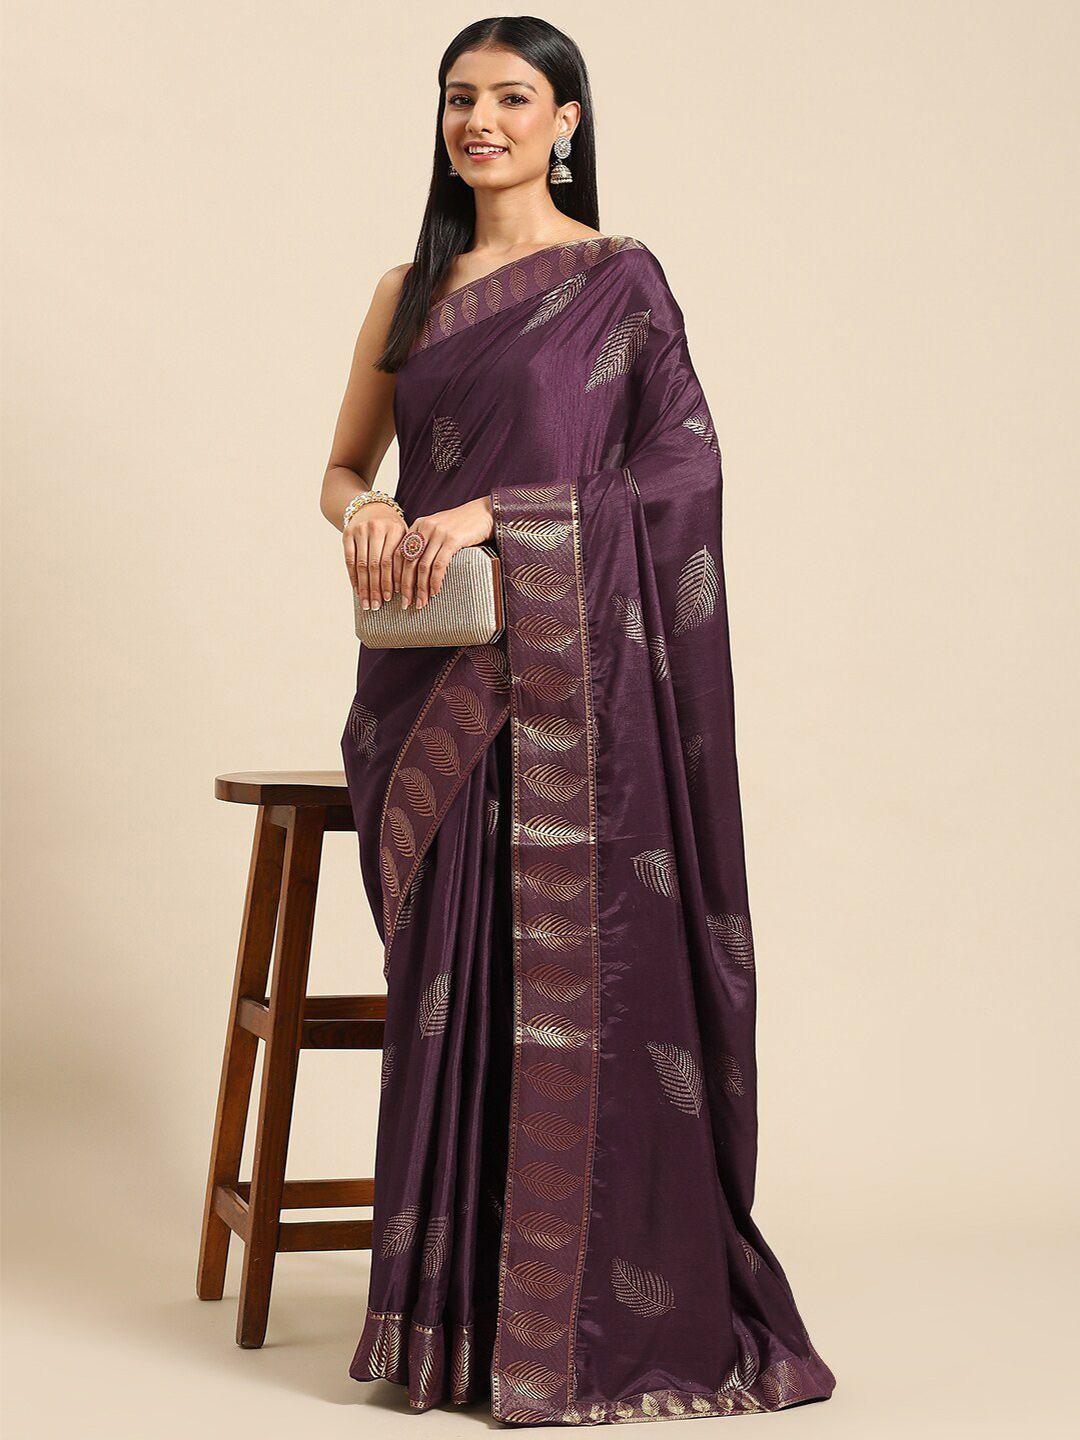 all about you purple & gold-toned floral zari poly crepe saree